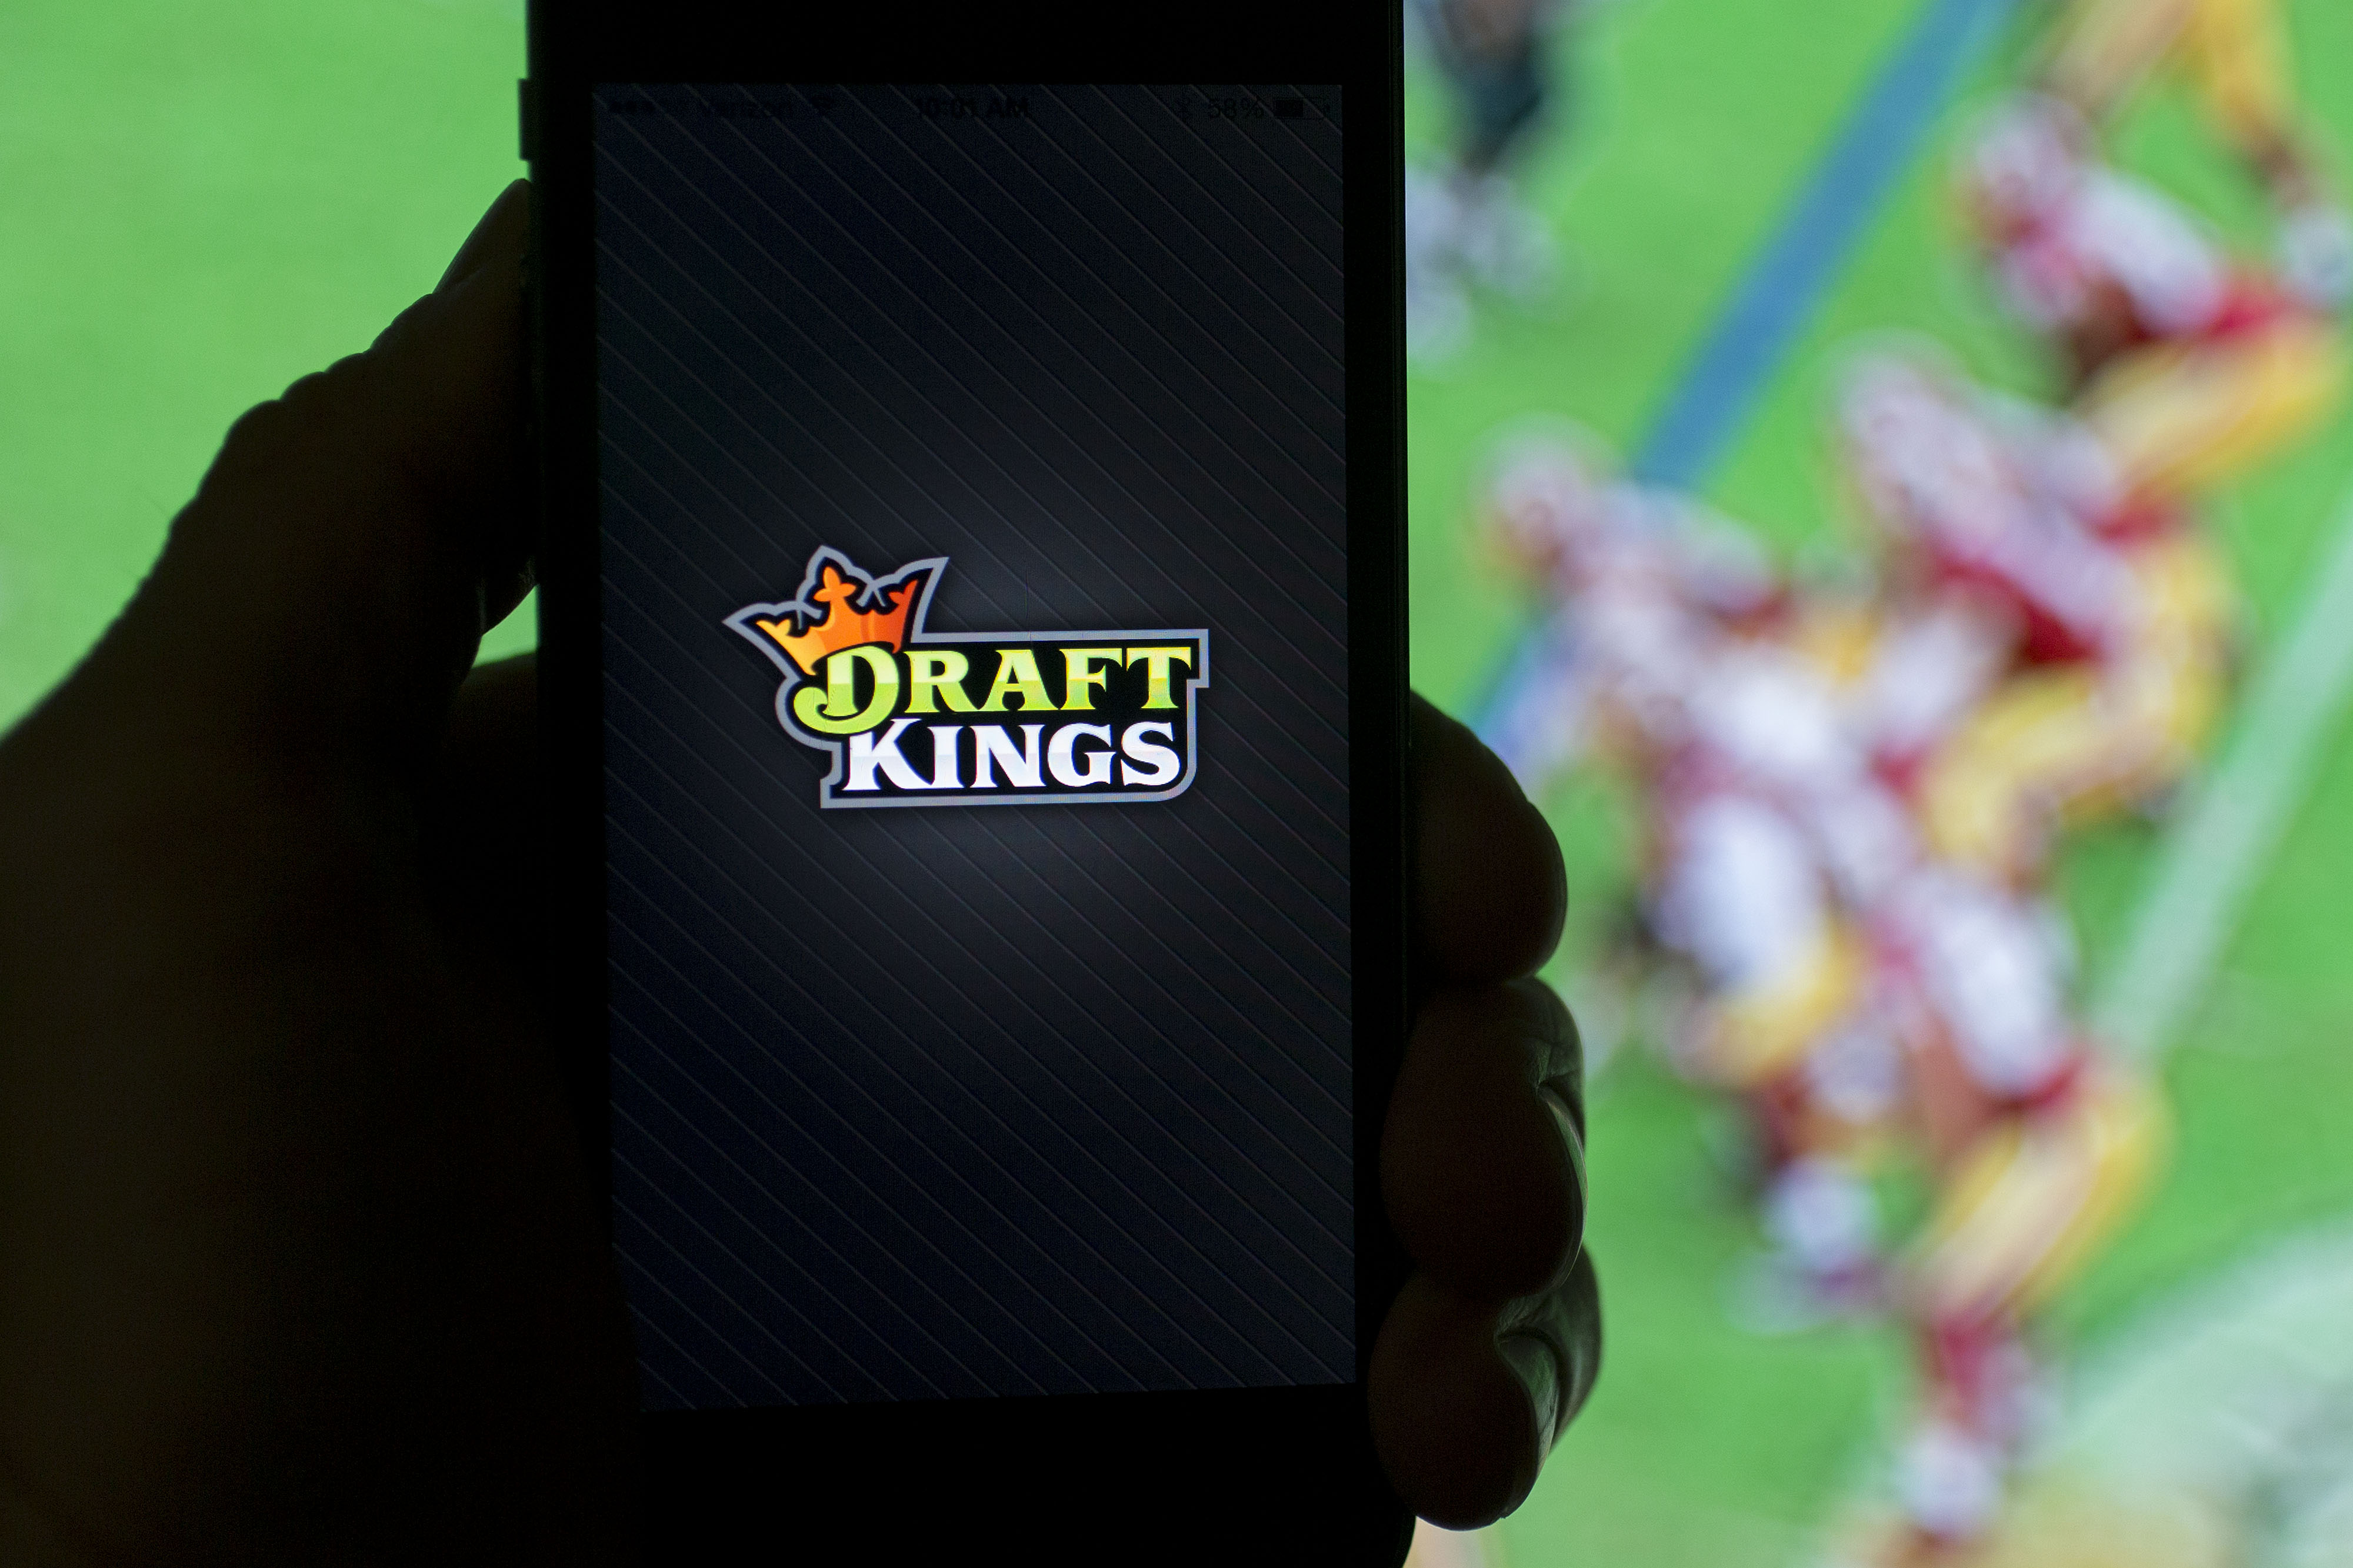 The DraftKings Inc. logo is arranged for a photograph on an Apple Inc. iPhone in Washington, D.C., U.S., on Sunday, Oct. 4, 2015. Fantasy sports companies DraftKings Inc. and FanDuel Inc. raised a total of $575 million in July from investors including KKR & Co., 21st Century Fox Inc. and Major League Baseball to attract players to games that pay out millions of dollars in cash prizes in daily contests. Photographer: Andrew Harrer/Bloomberg via Getty Images